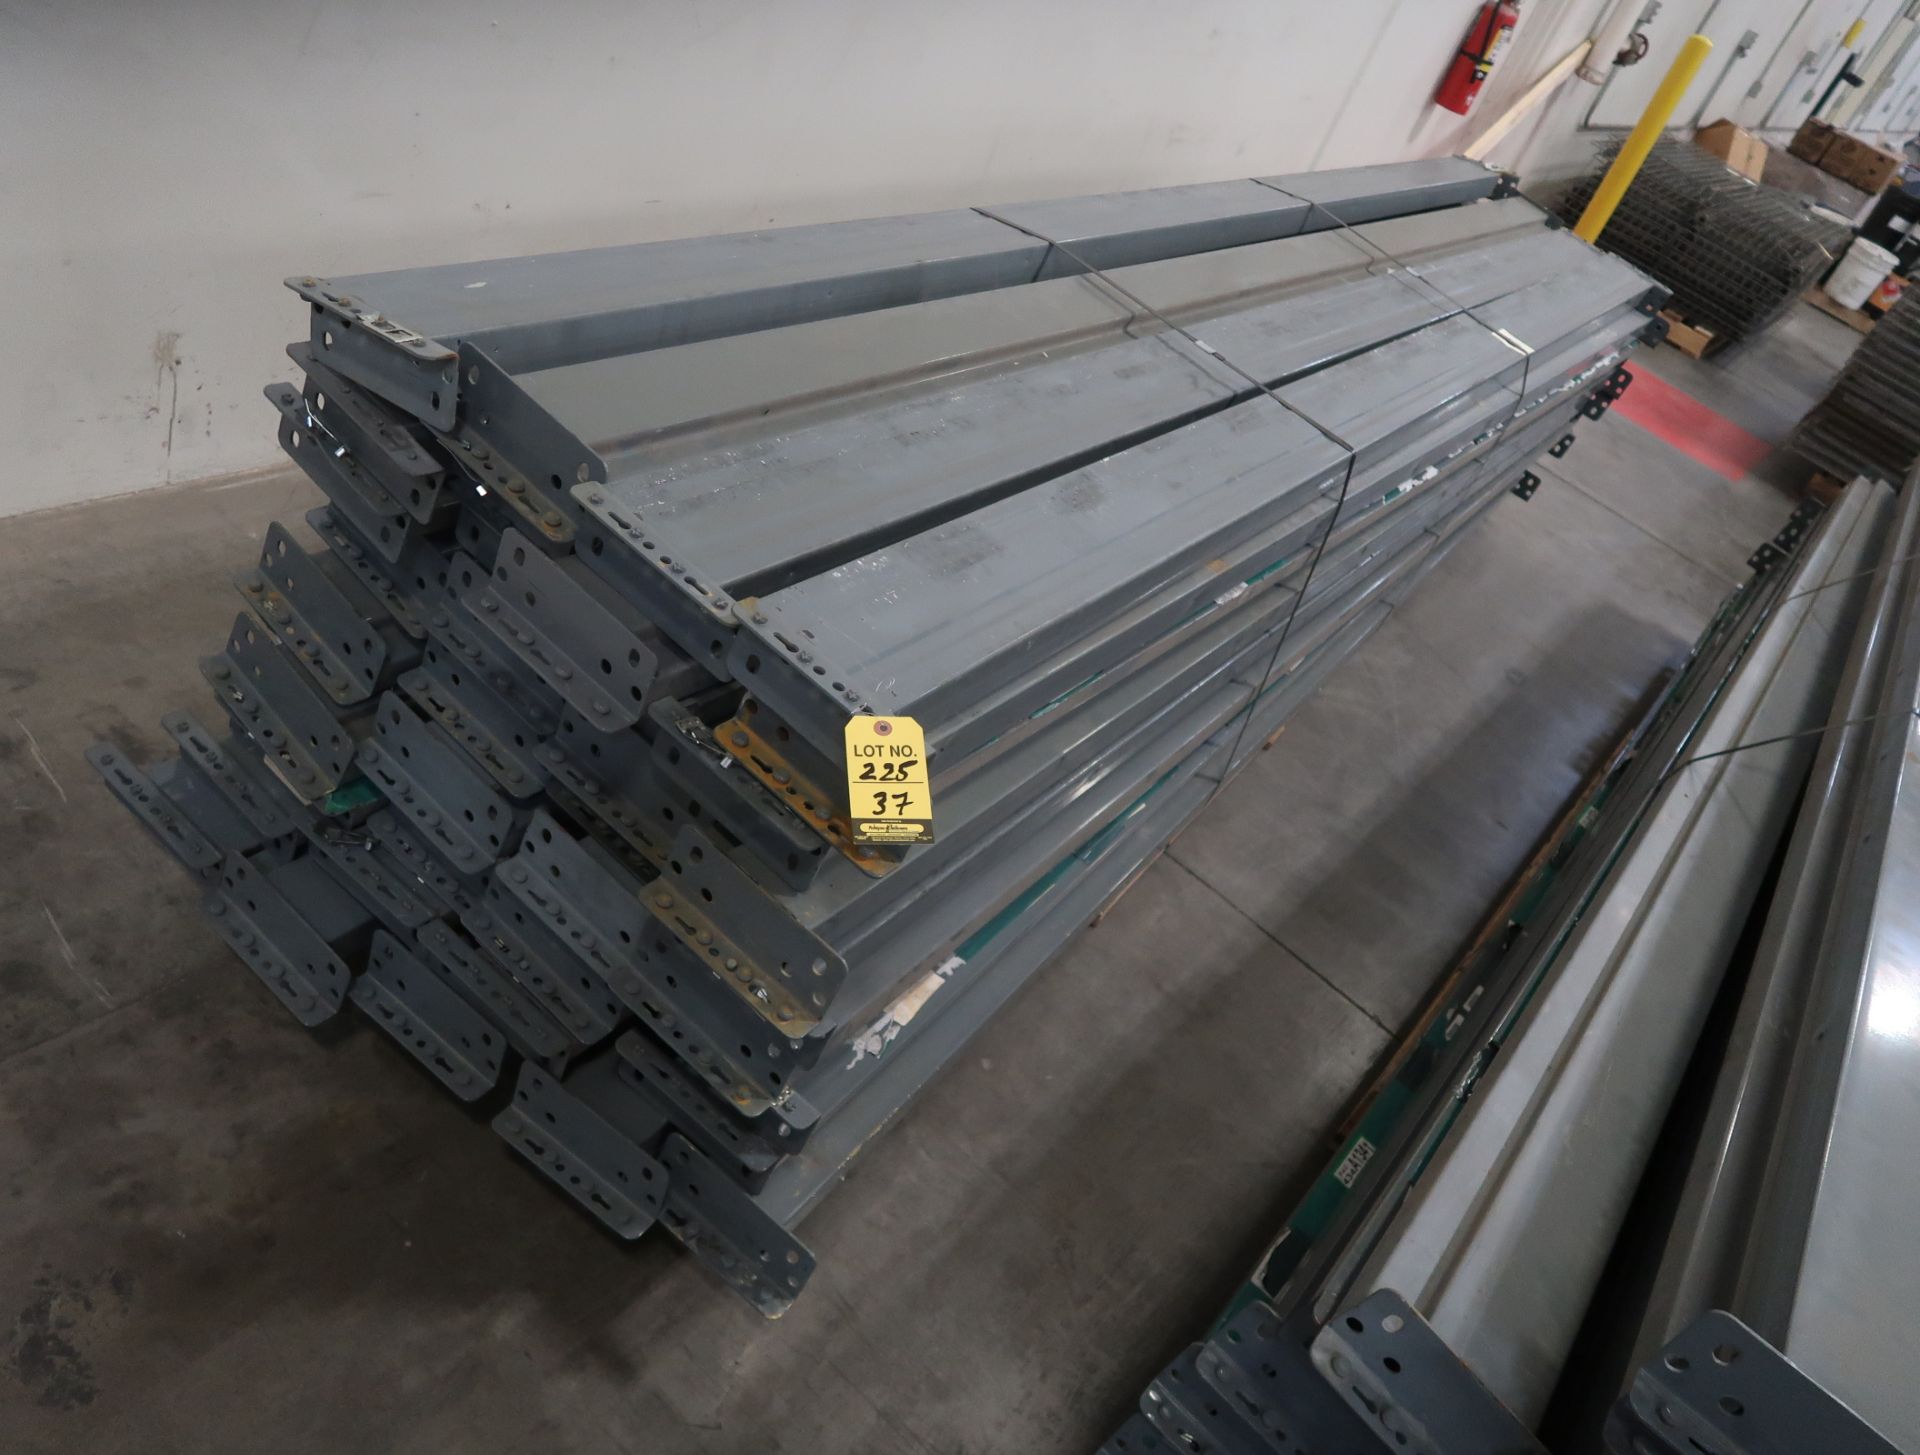 12' BEAMS. LOCATED AT: 121 S. 39TH AVE. SUITE 2, PHOENIX, AZ 85009. PICKUP TIMES FOR THESE LOTS IS